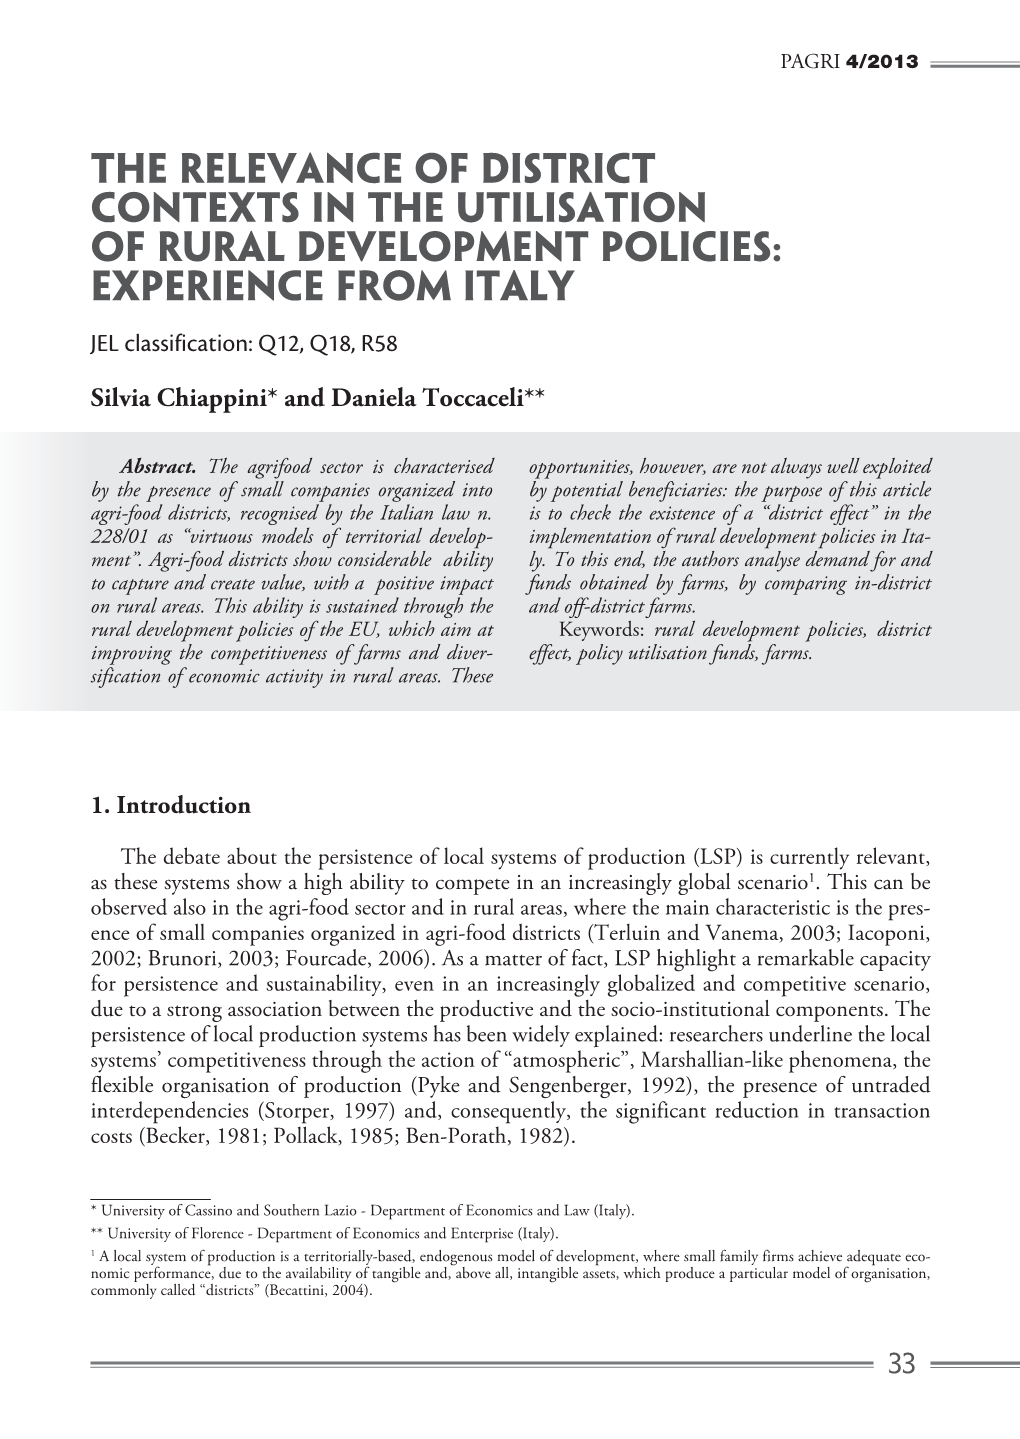 The Relevance of District Contexts in the UTILISATION of Rural Development Policies: Experience from Italy JEL Classification: Q12, Q18, R58